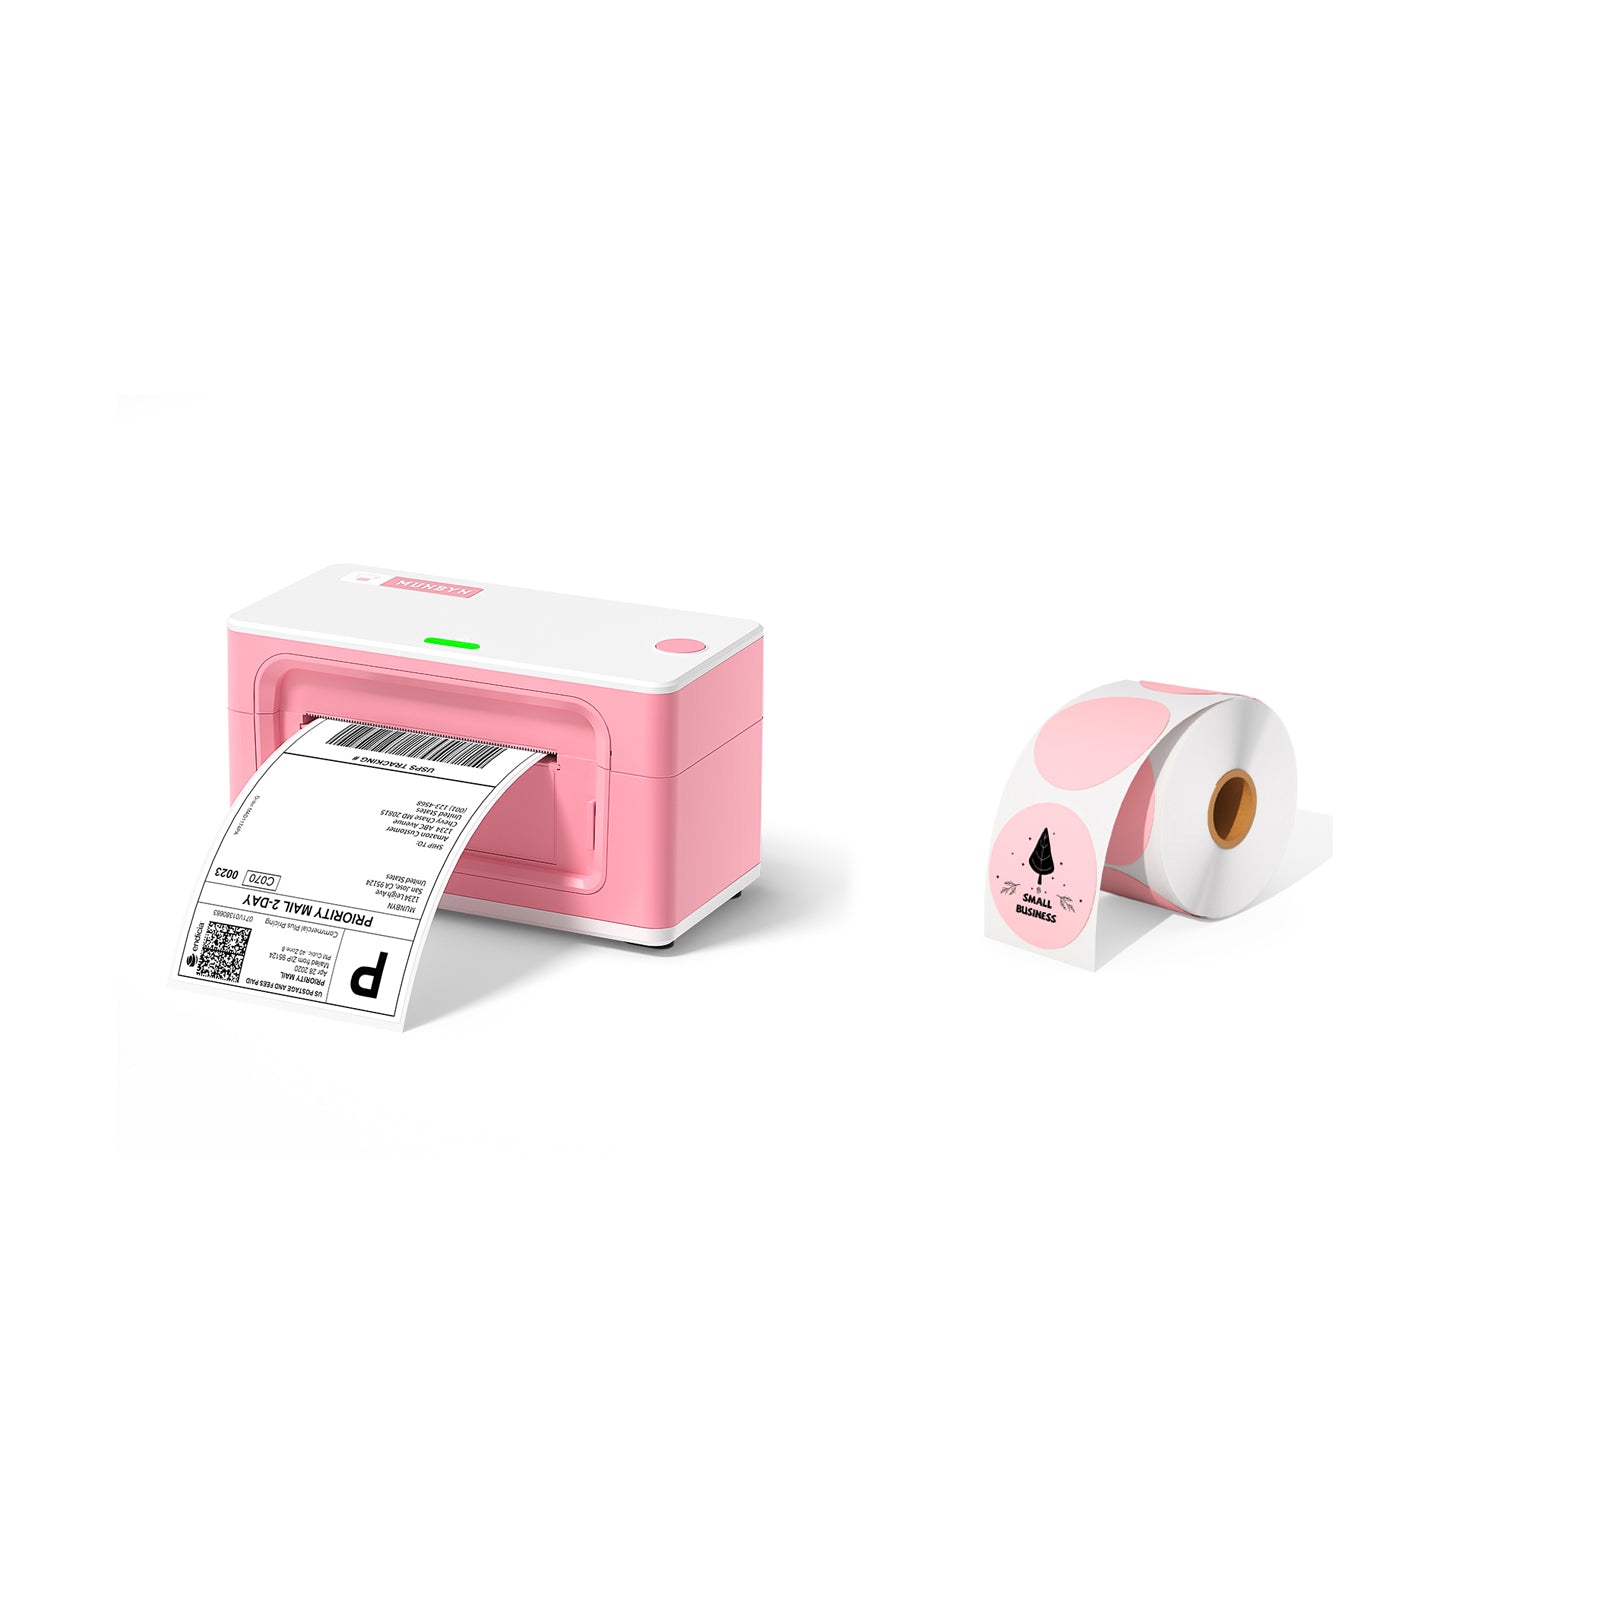 The MUNBYN P941 Pro Printer Kit includes a printer and a roll of pink circle labels.